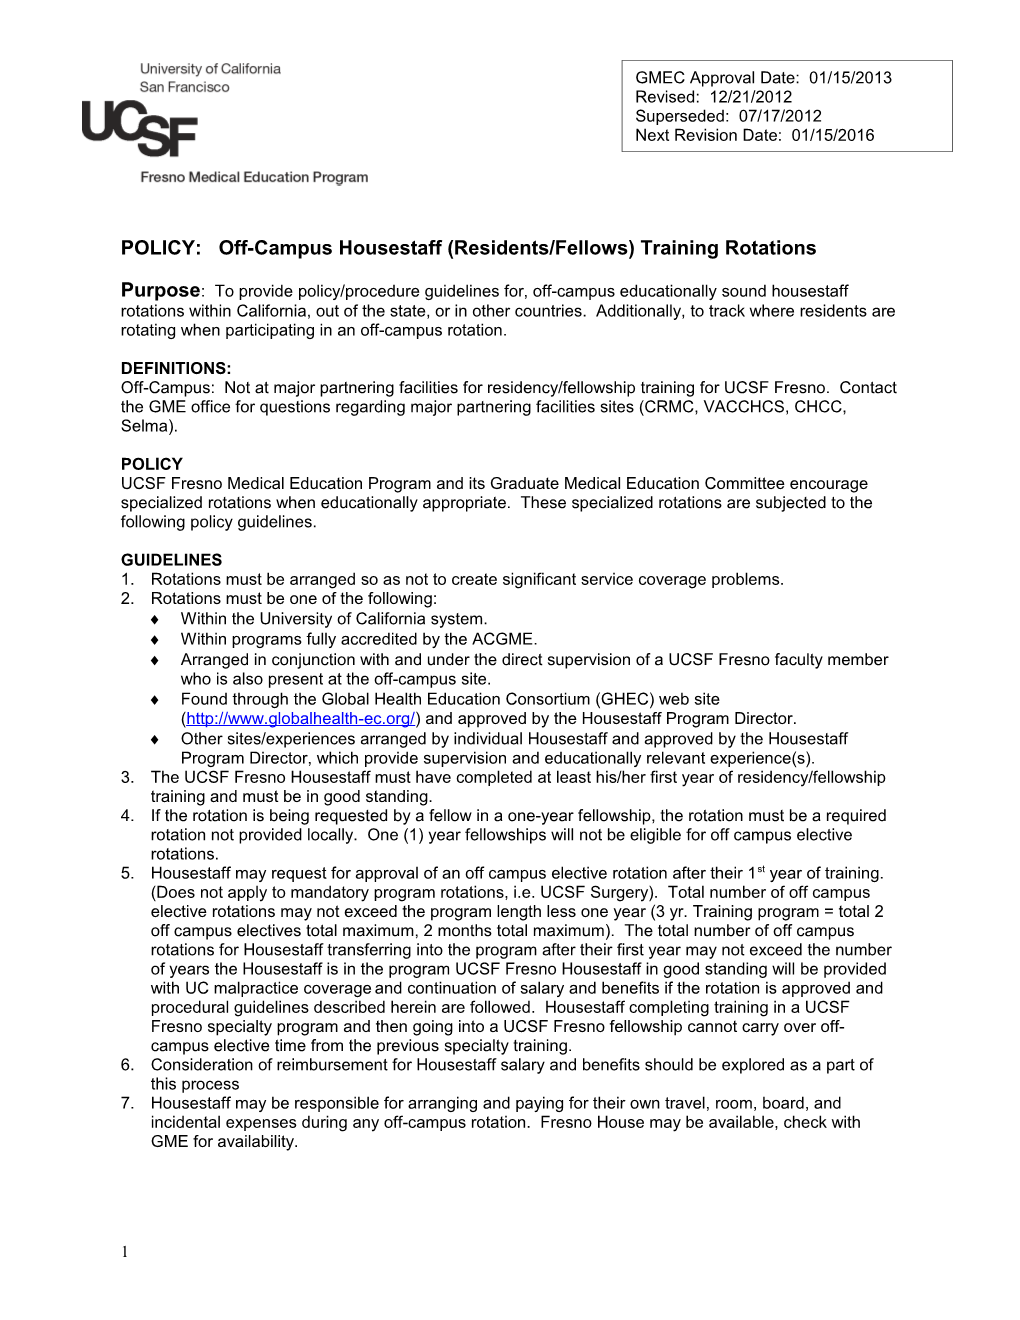 POLICY: Off-Campus Housestaff(Residents/Fellows)Training Rotations